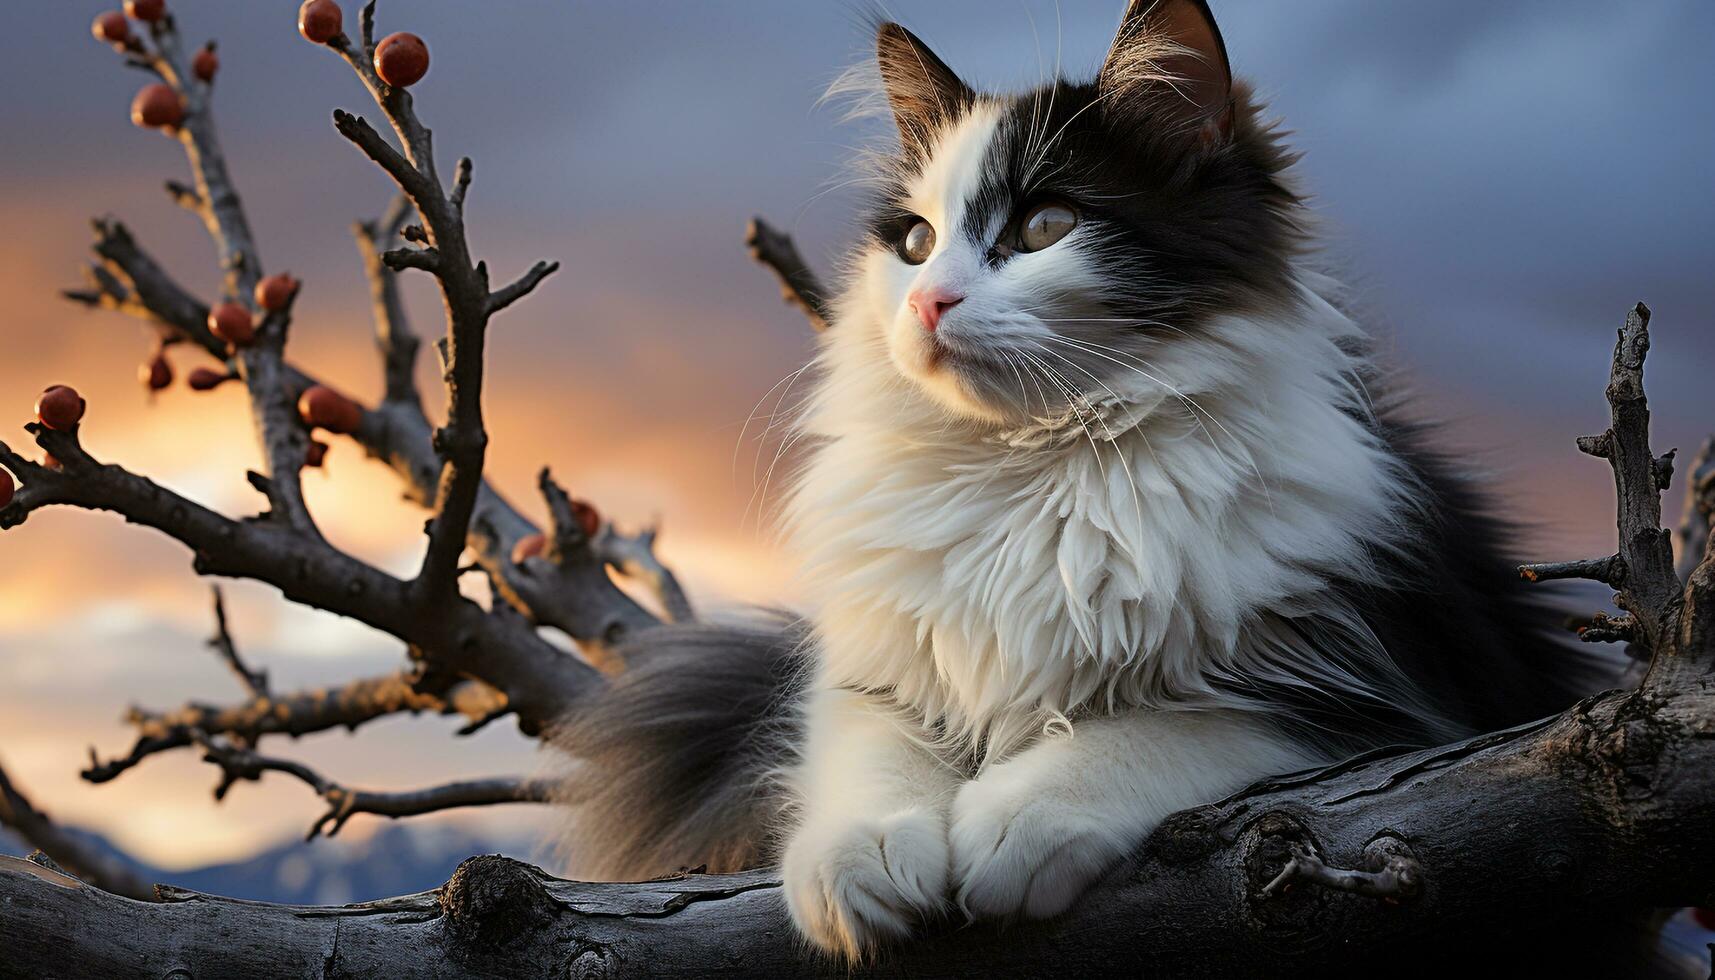 Cute kitten sitting on a branch, staring at the camera generated by AI photo